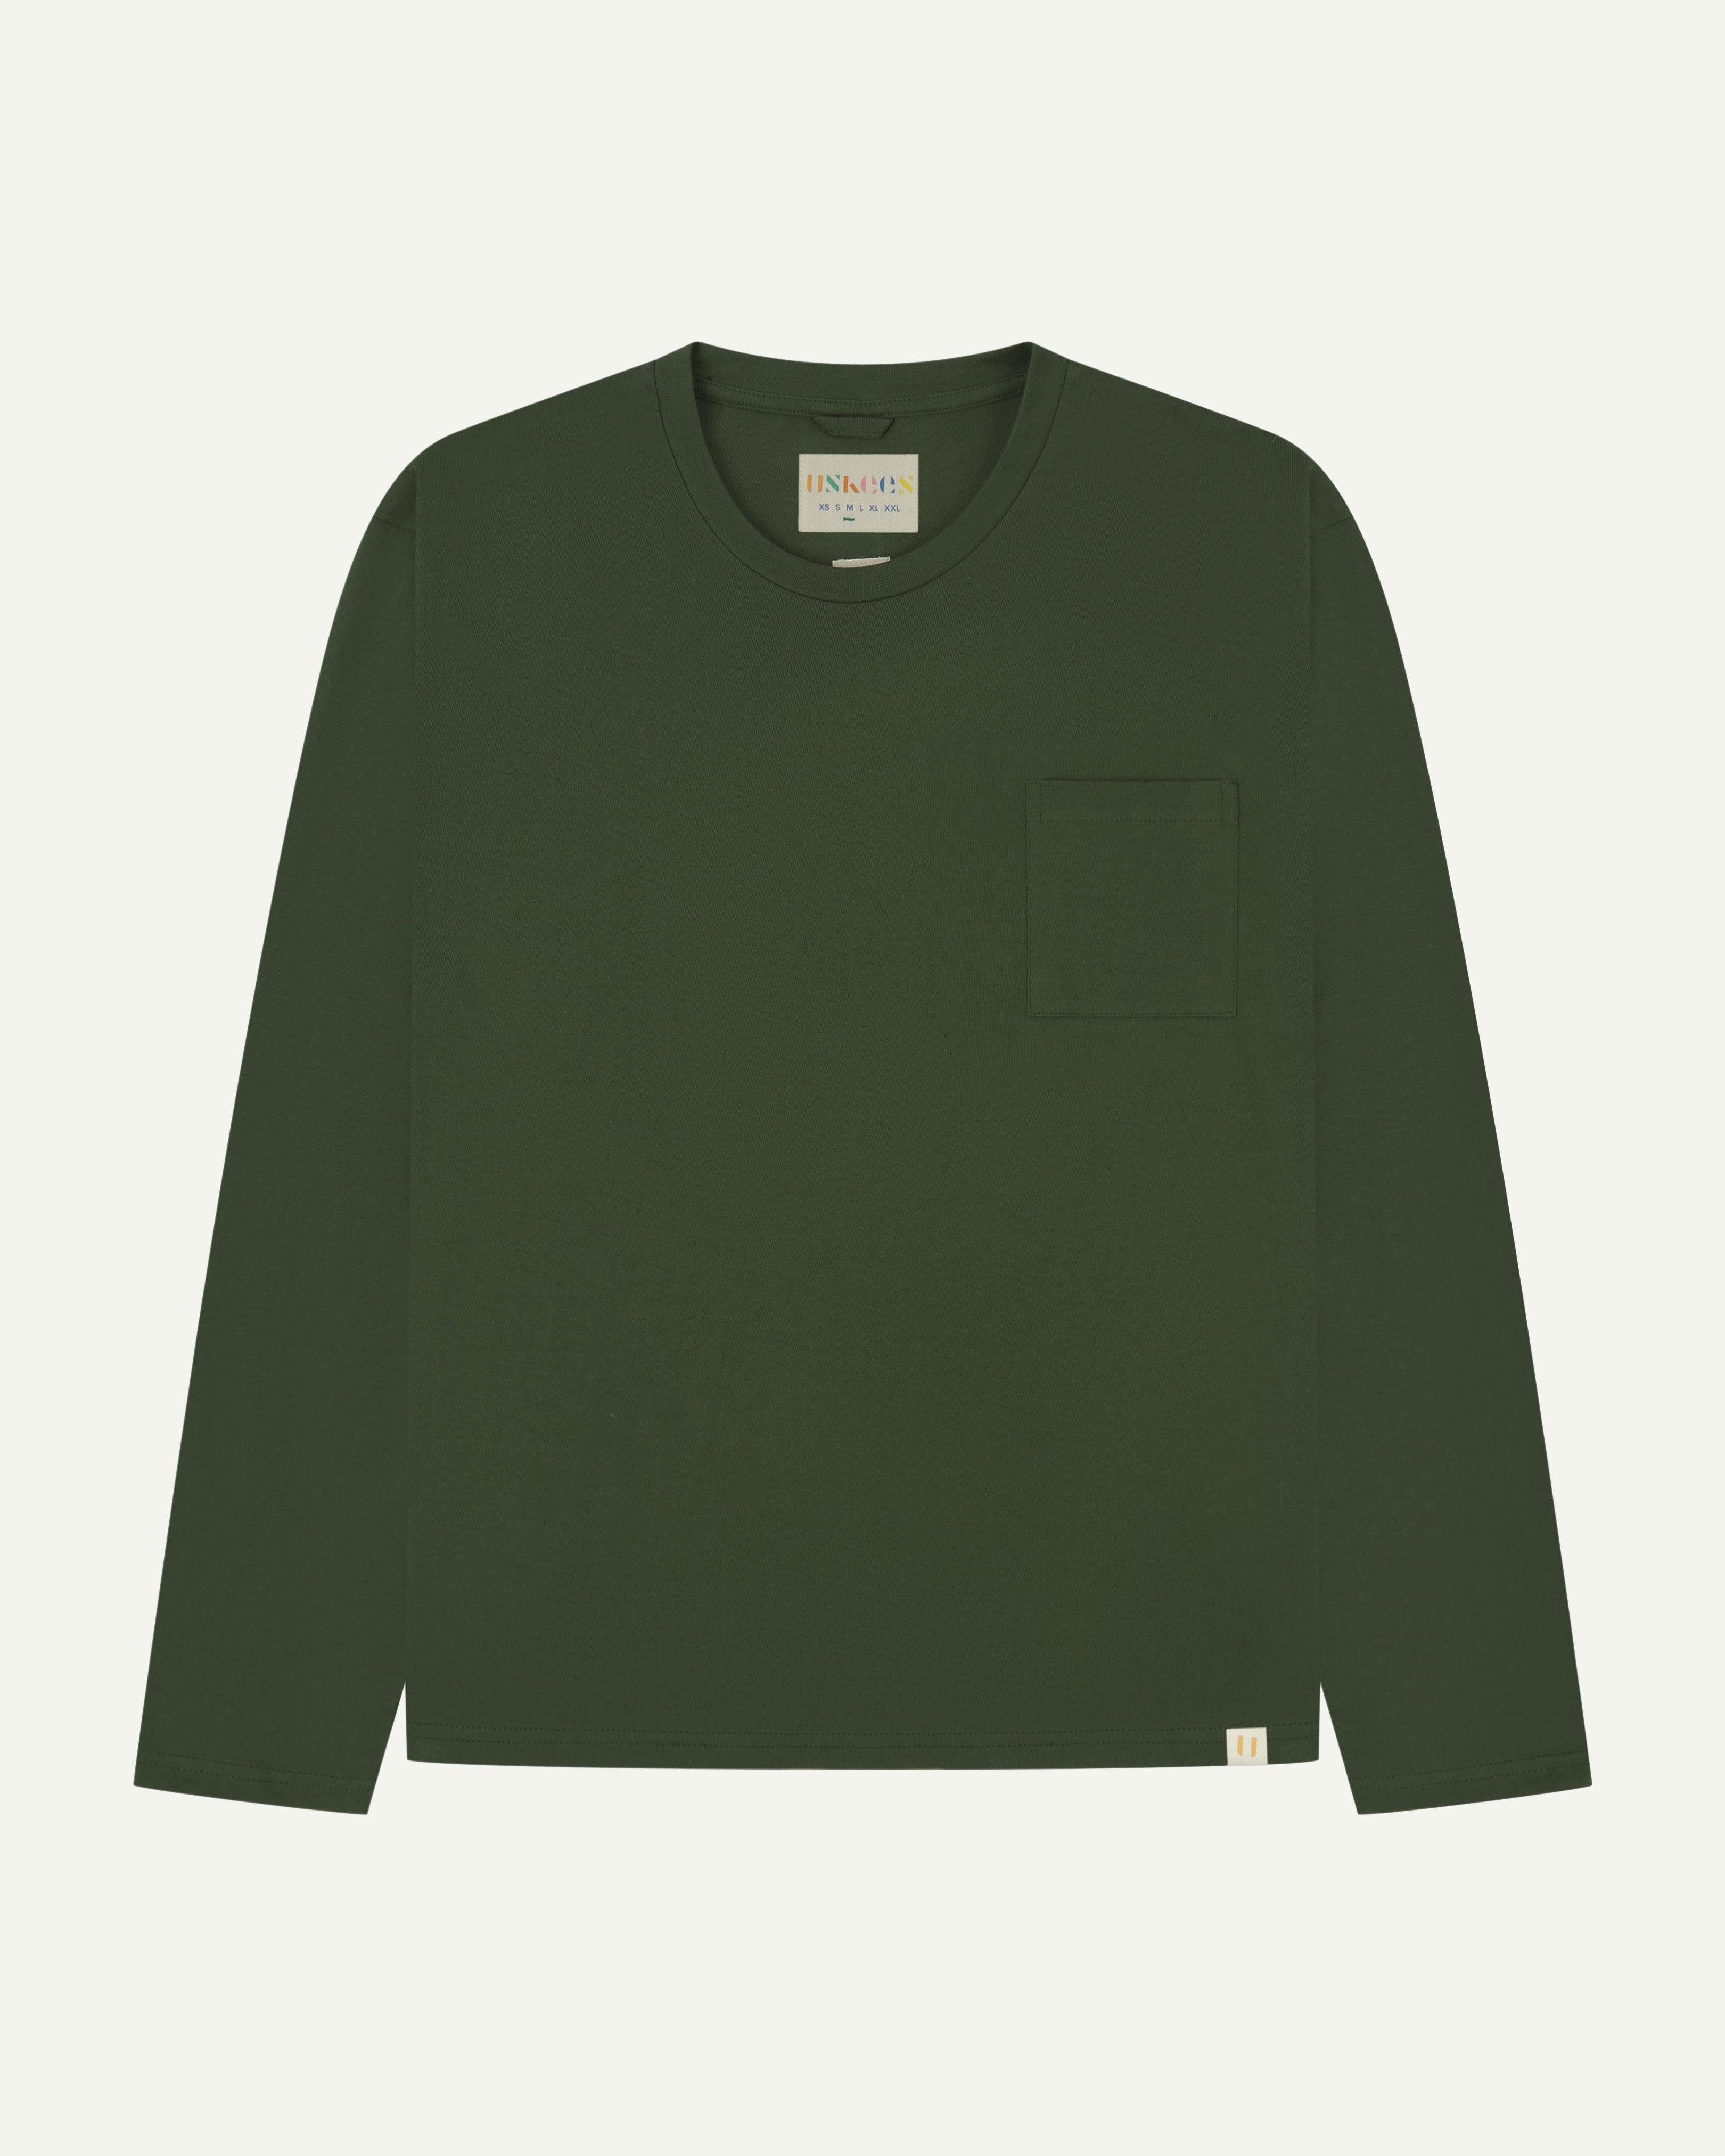 Front flat shot of long sleeve Uskees t-shirt in coriander green showing breast pocket and discreet Uskees branding at hem